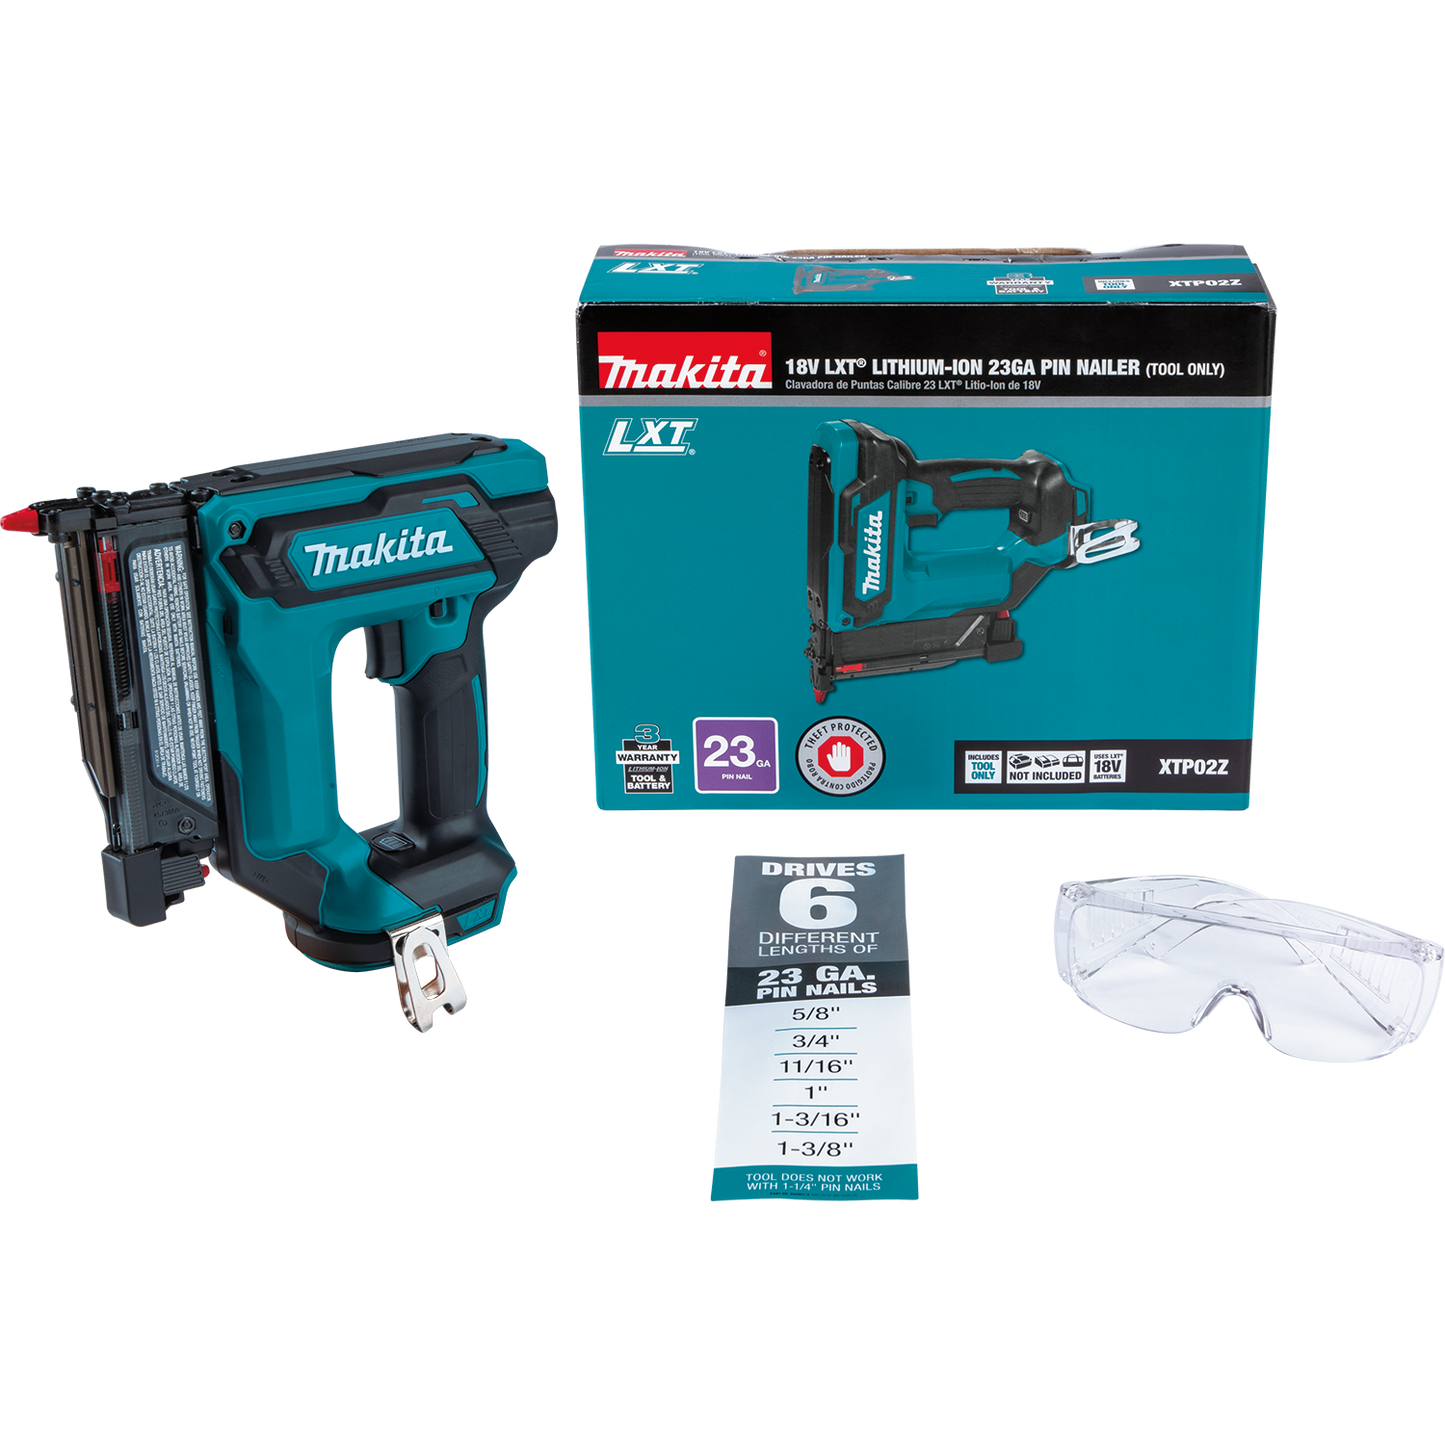 Makita 18 Volt LXT Lithium Ion Cordless 1 3/8 Inch 23 Gauge Pin Nailer Factory Serviced (Tool Only)